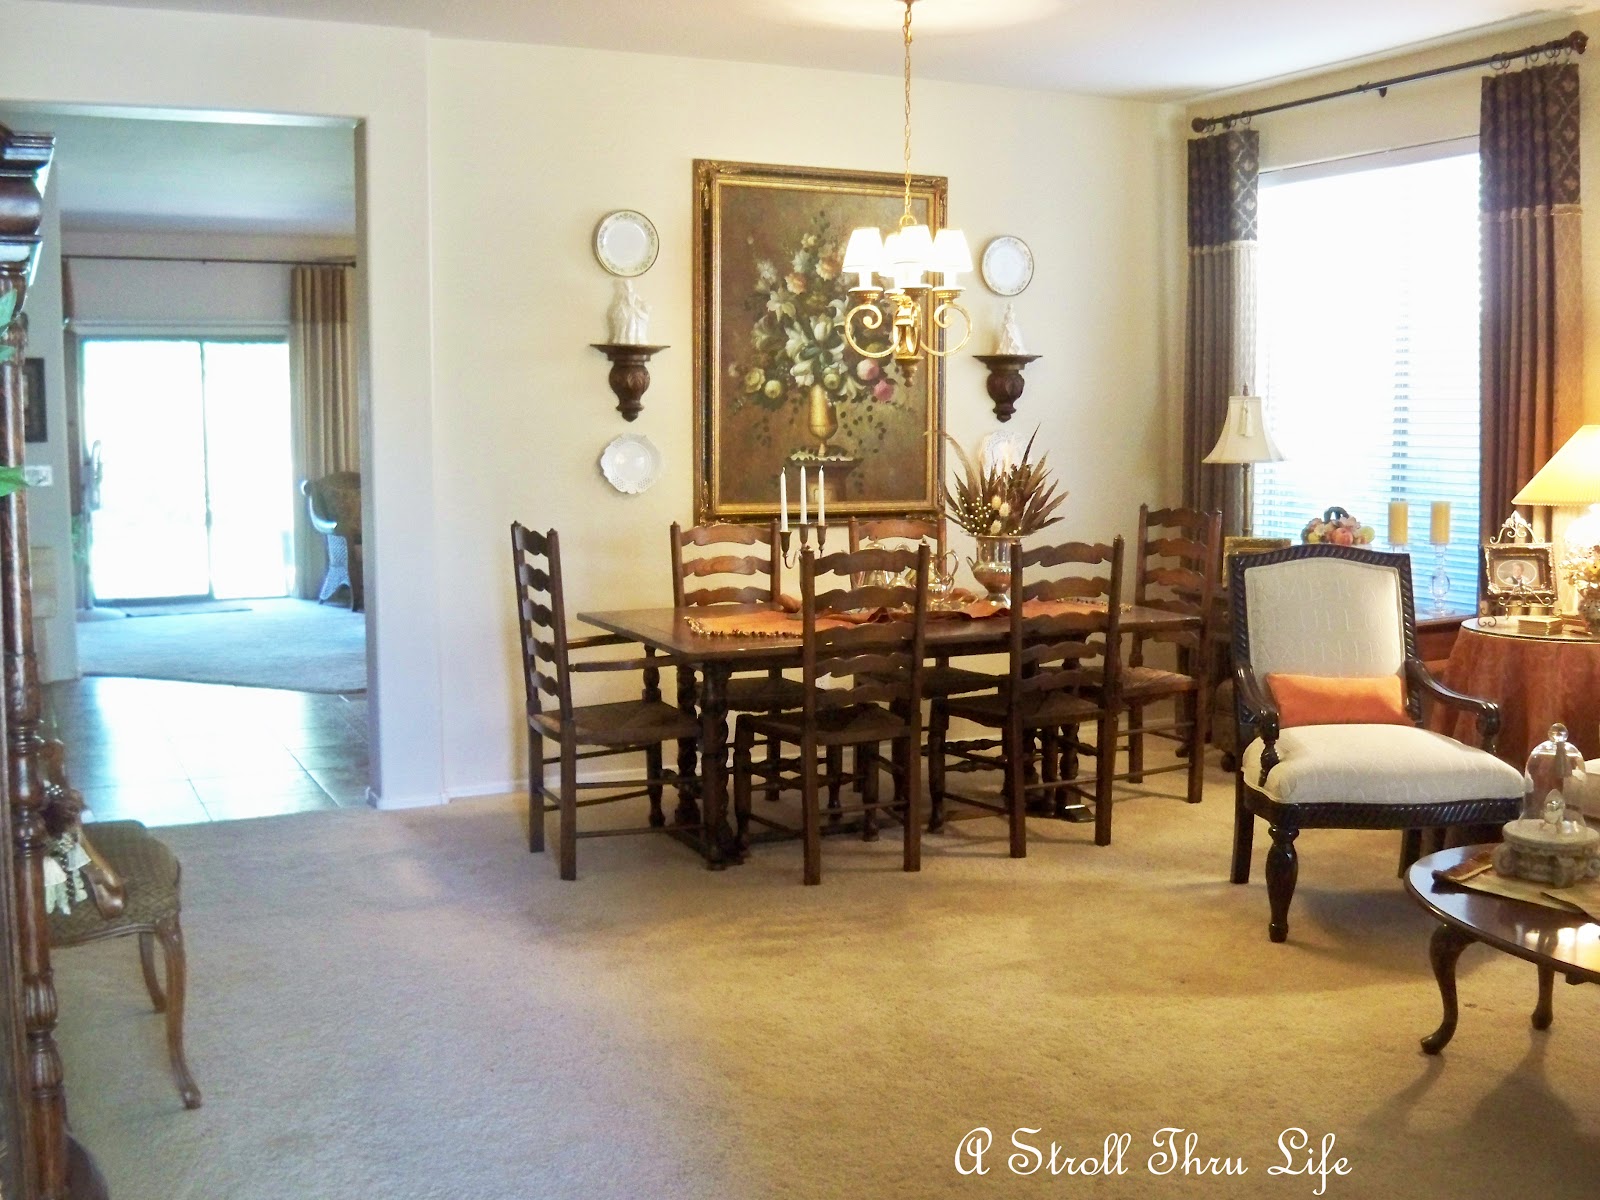 show dining room images